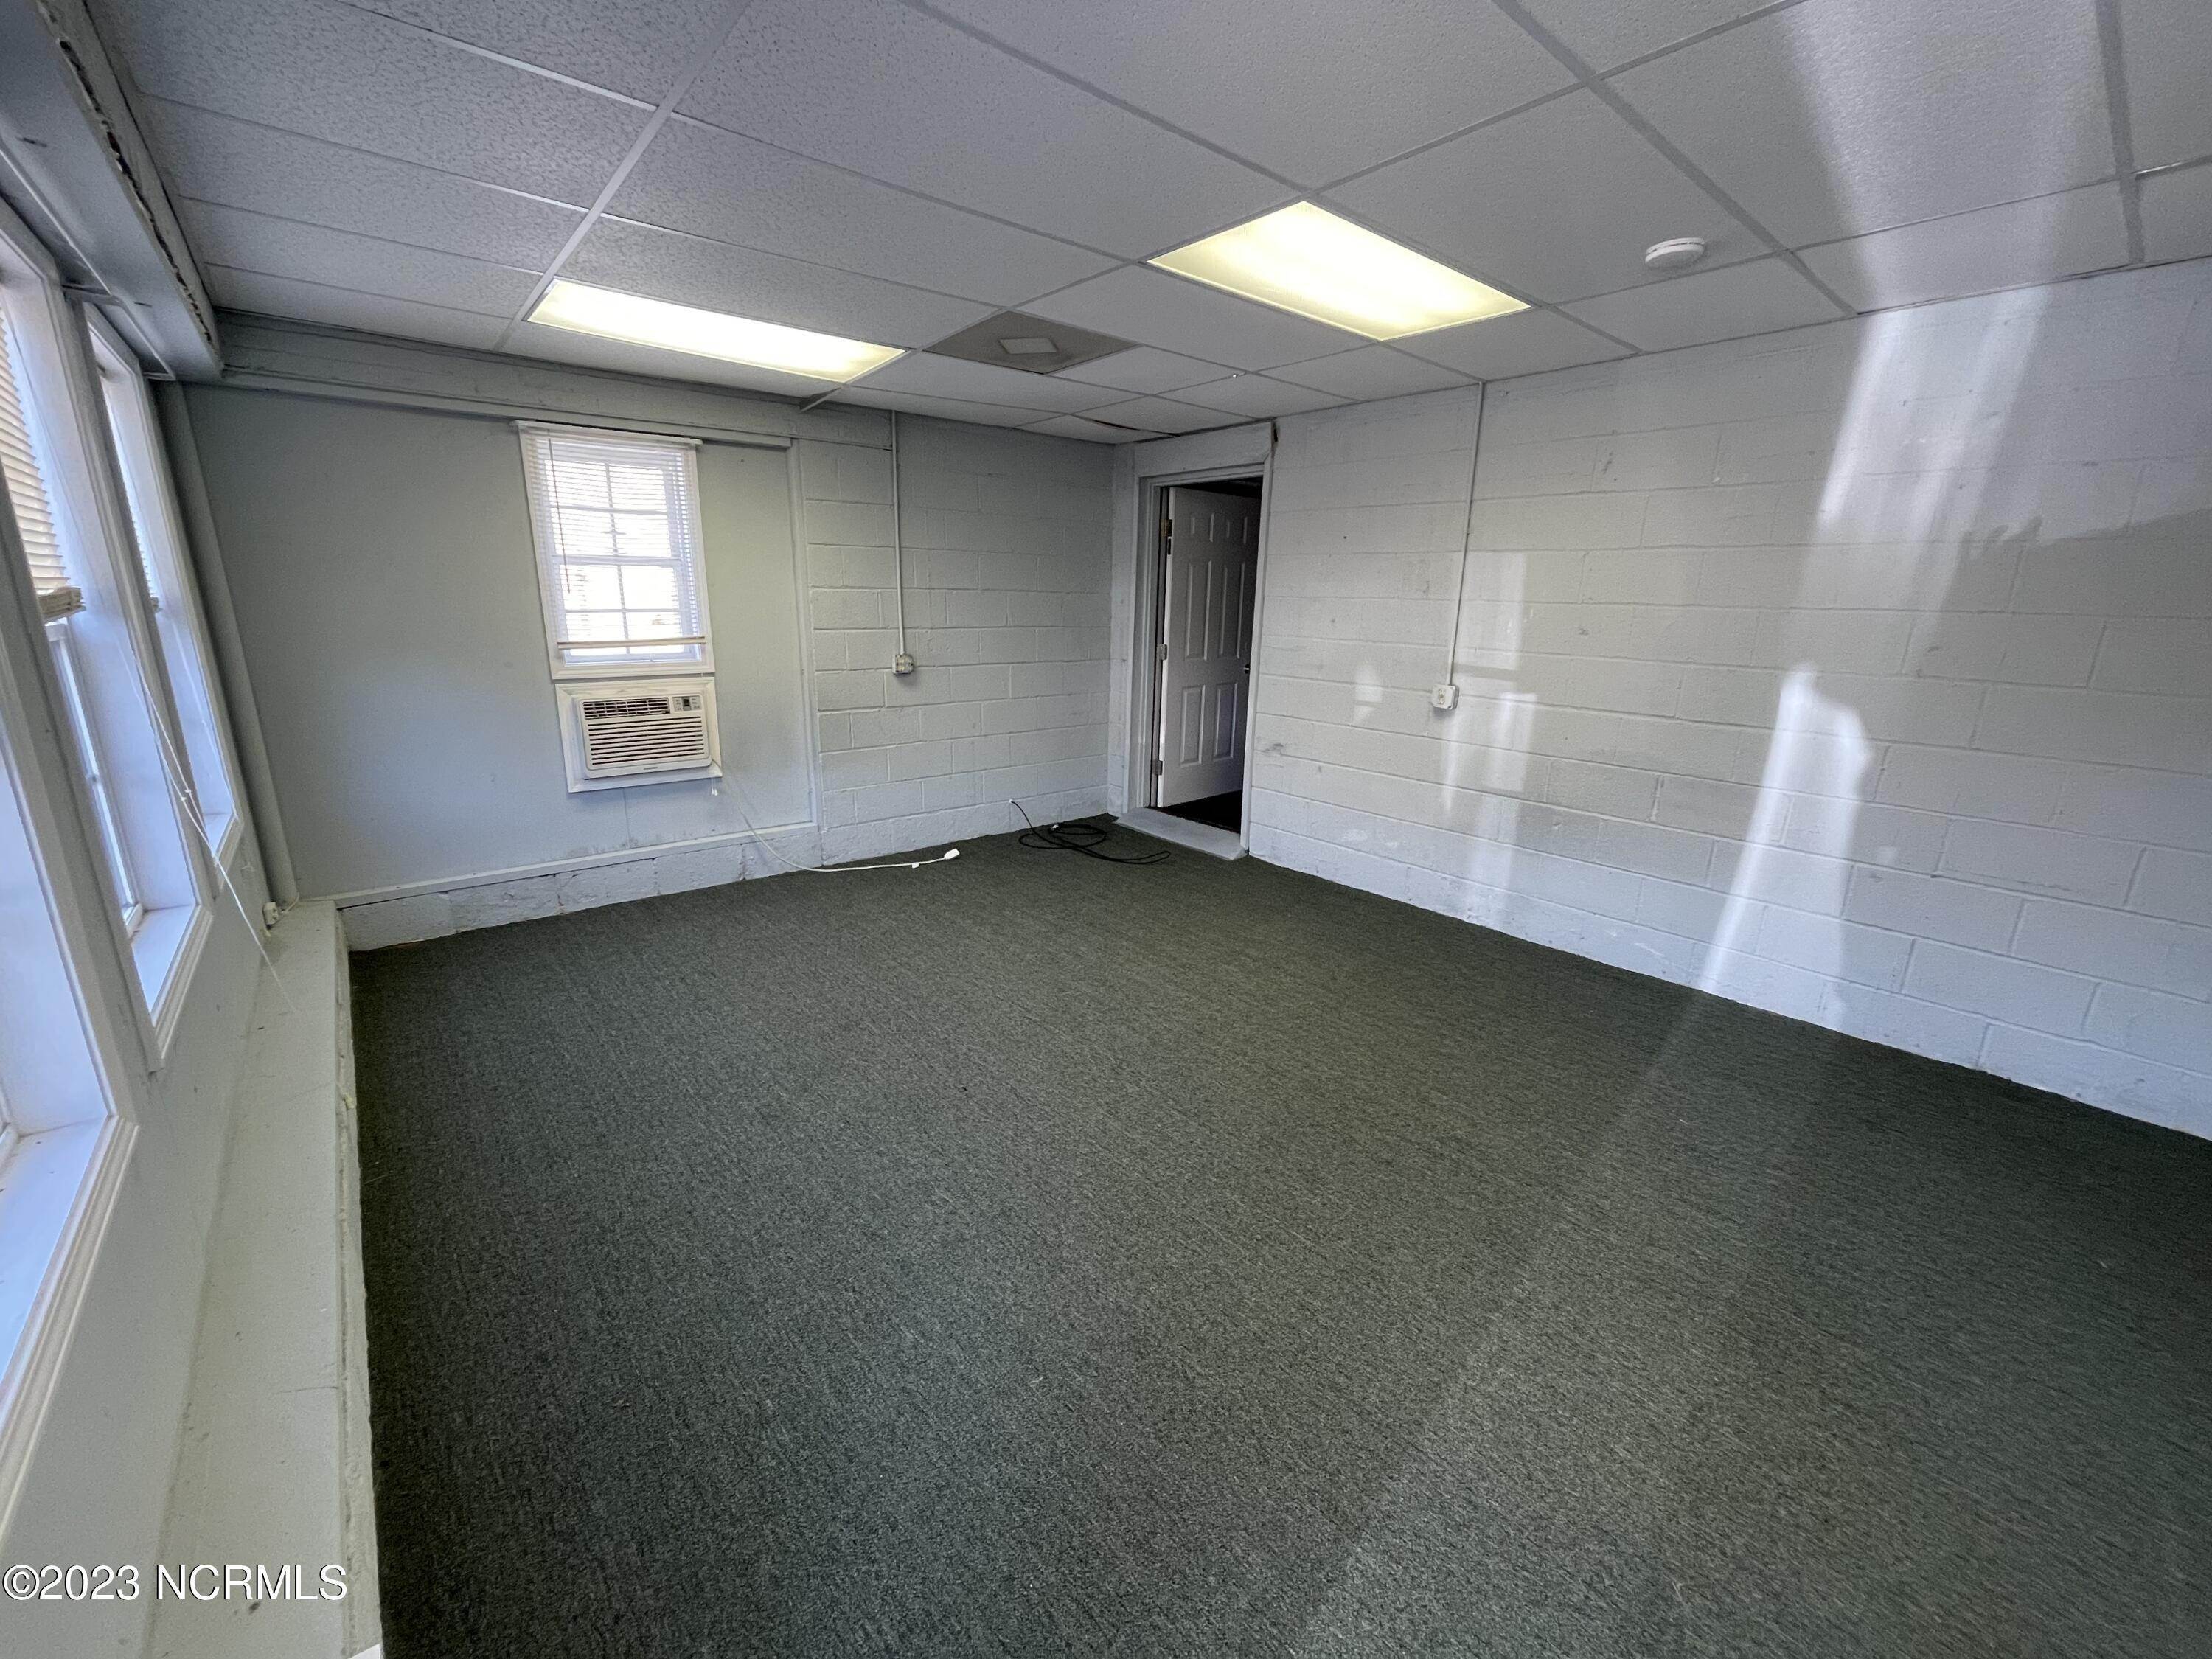 5. Commercial for Sale at 150 Main Street Star, North Carolina 27356 United States